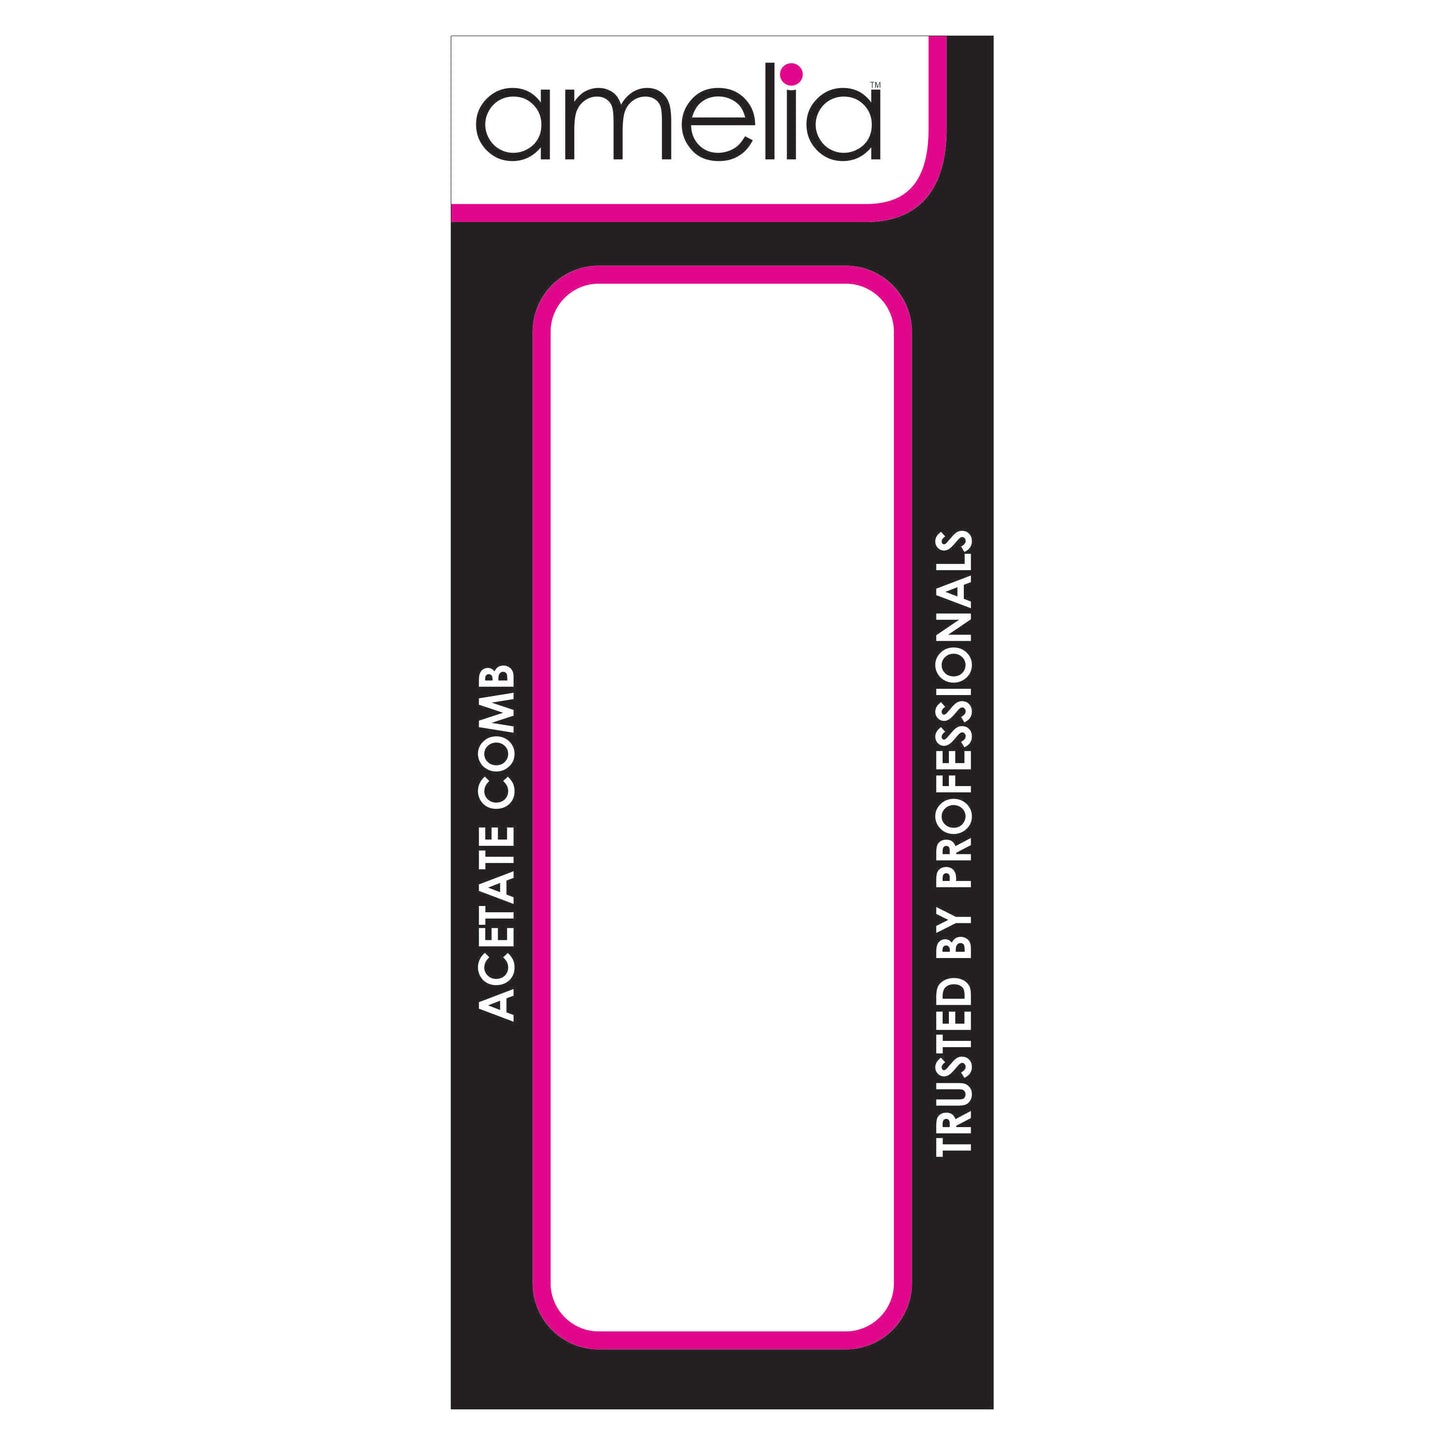 Amelia Beauty Cellulose Acetate 7in Styling Comb, Handmade, Smooth Edges, Eco-Friendly Plant Based Material, Fine and Course Teeth - Black Color